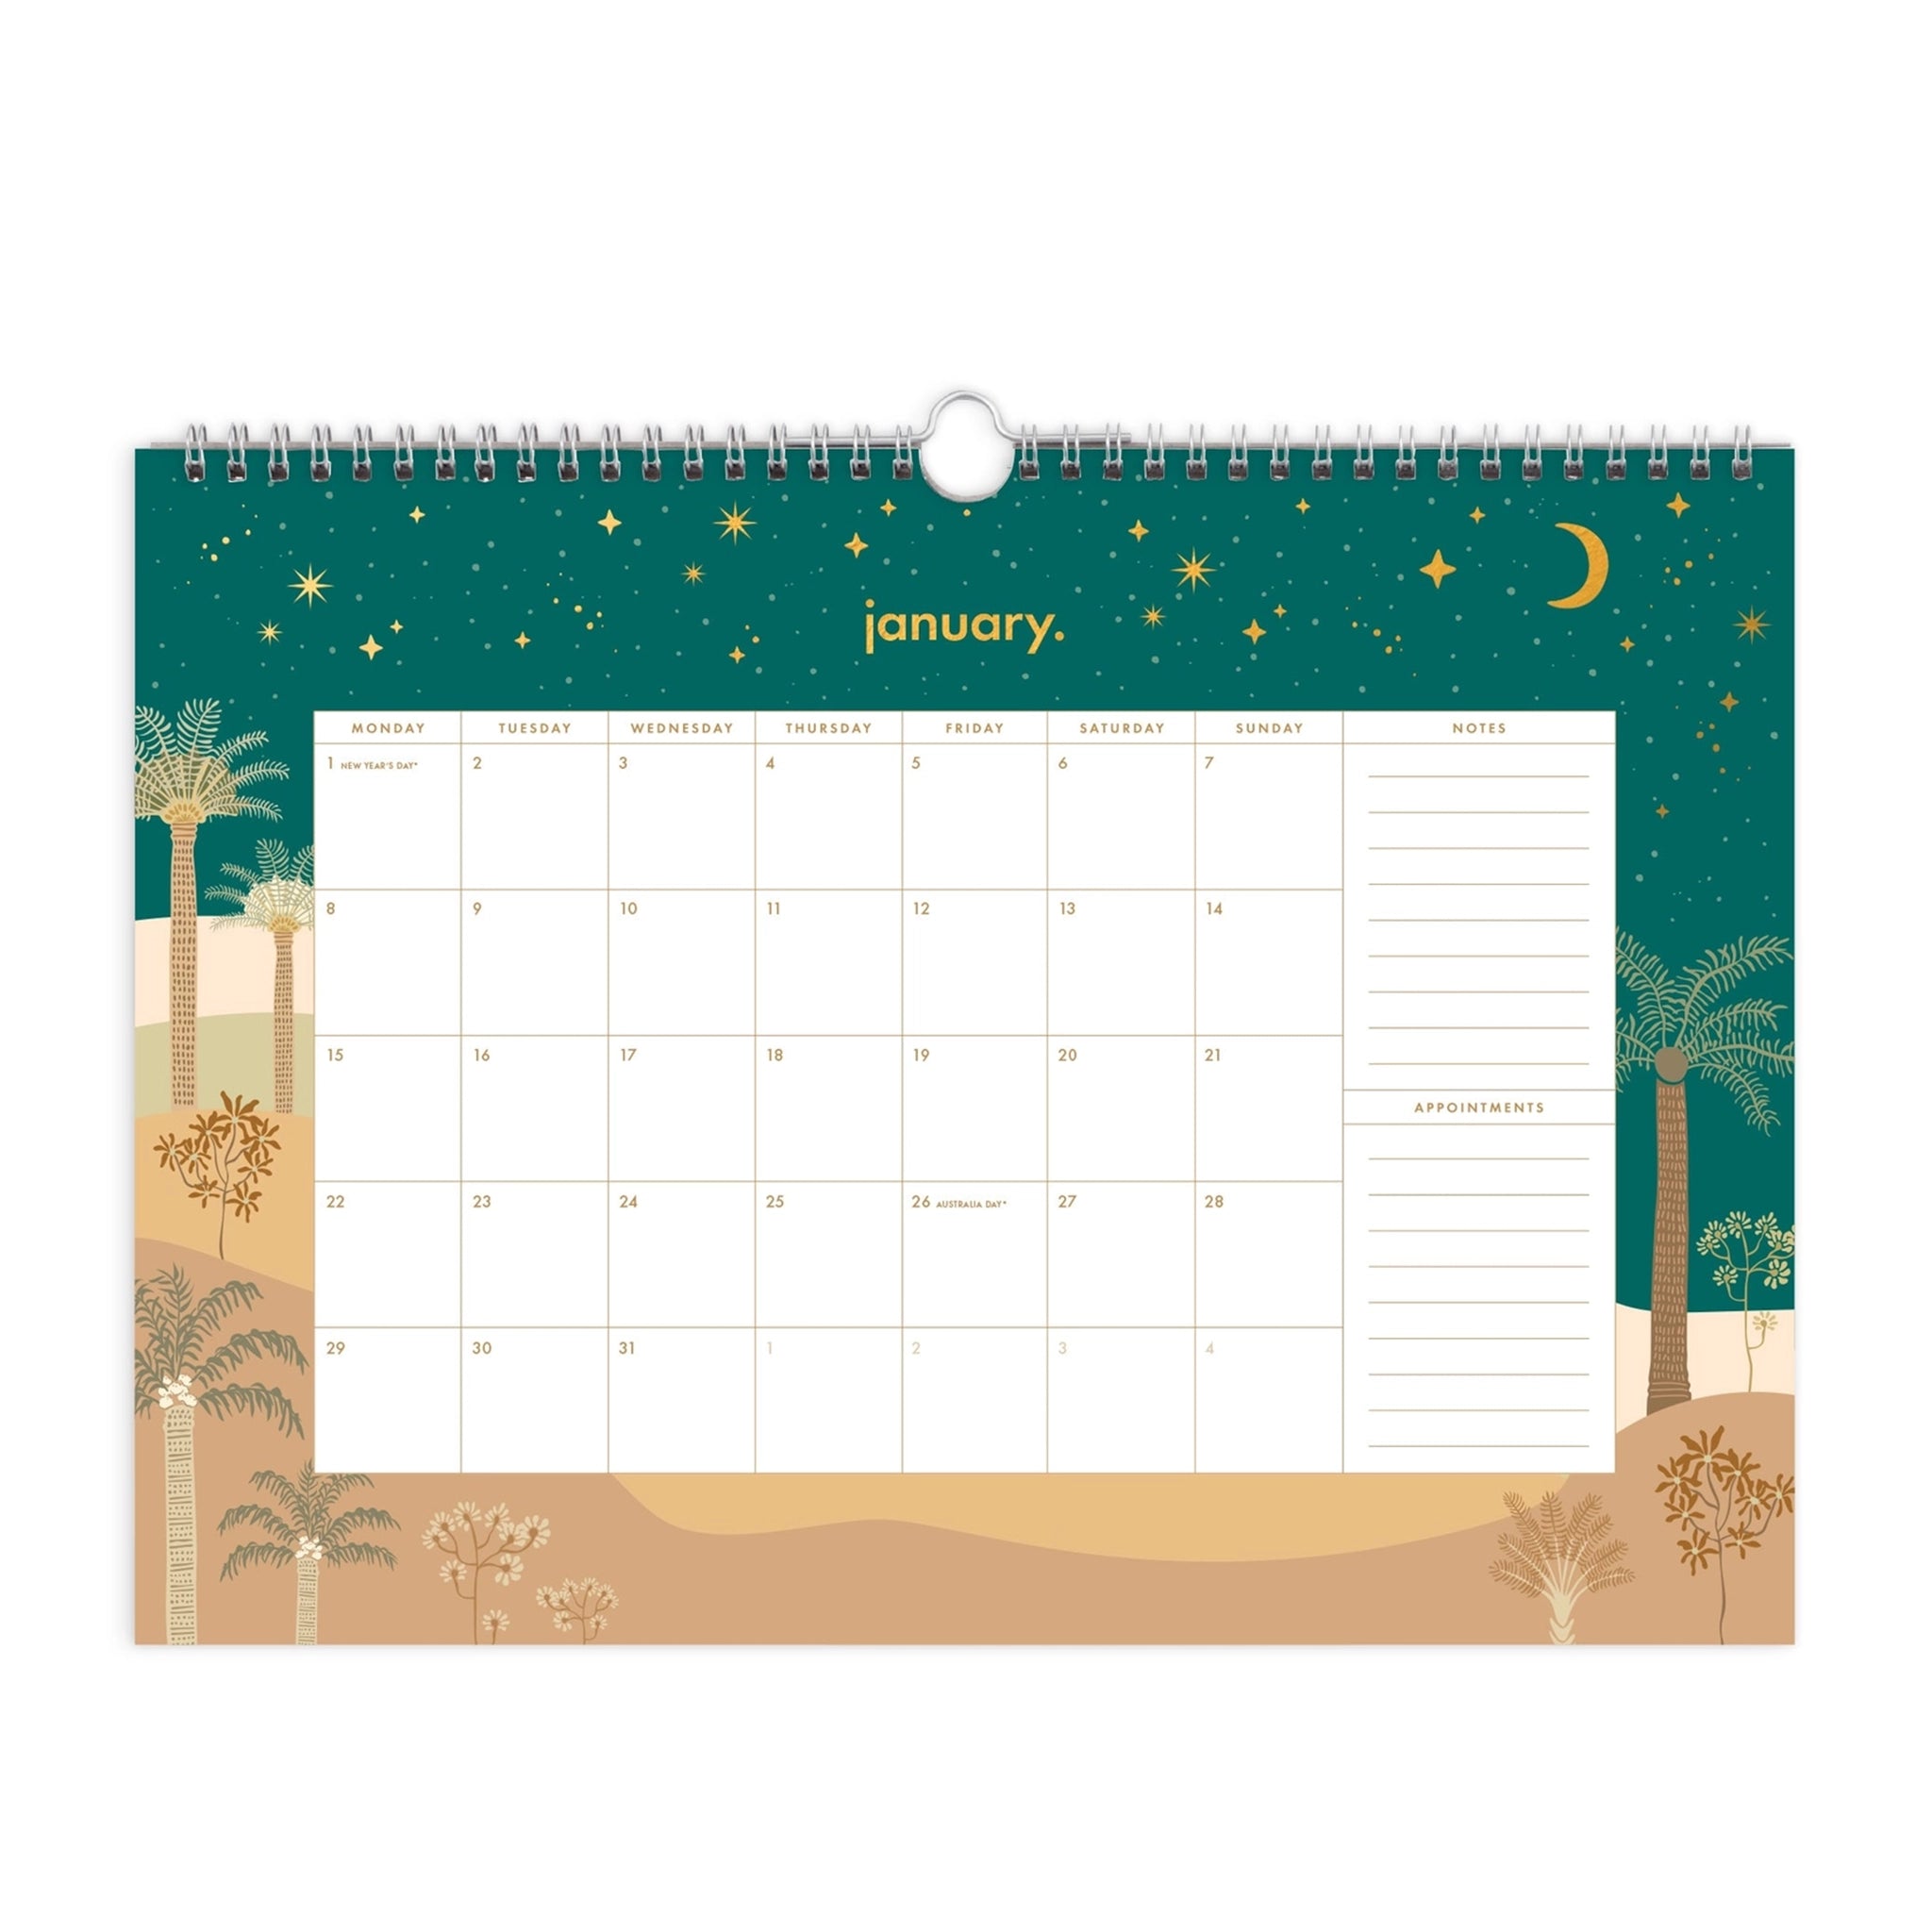 On a white background is a spiral bound calendar with an illustration of a desert scape at night time along with a white monthly view in the center. 